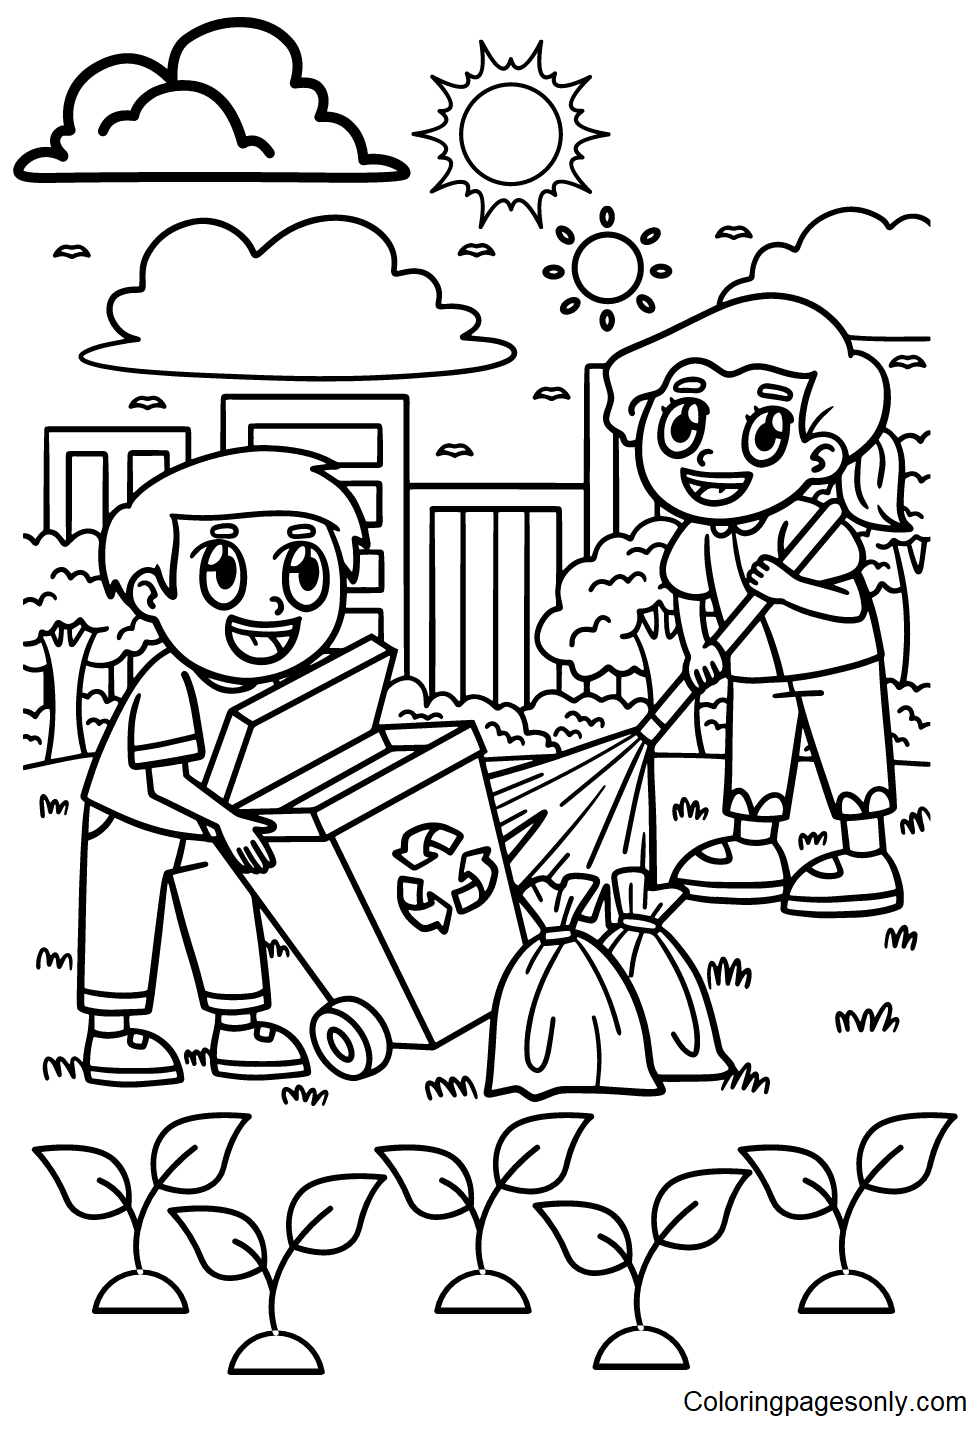 Children Cleaning the Trash Coloring Pages